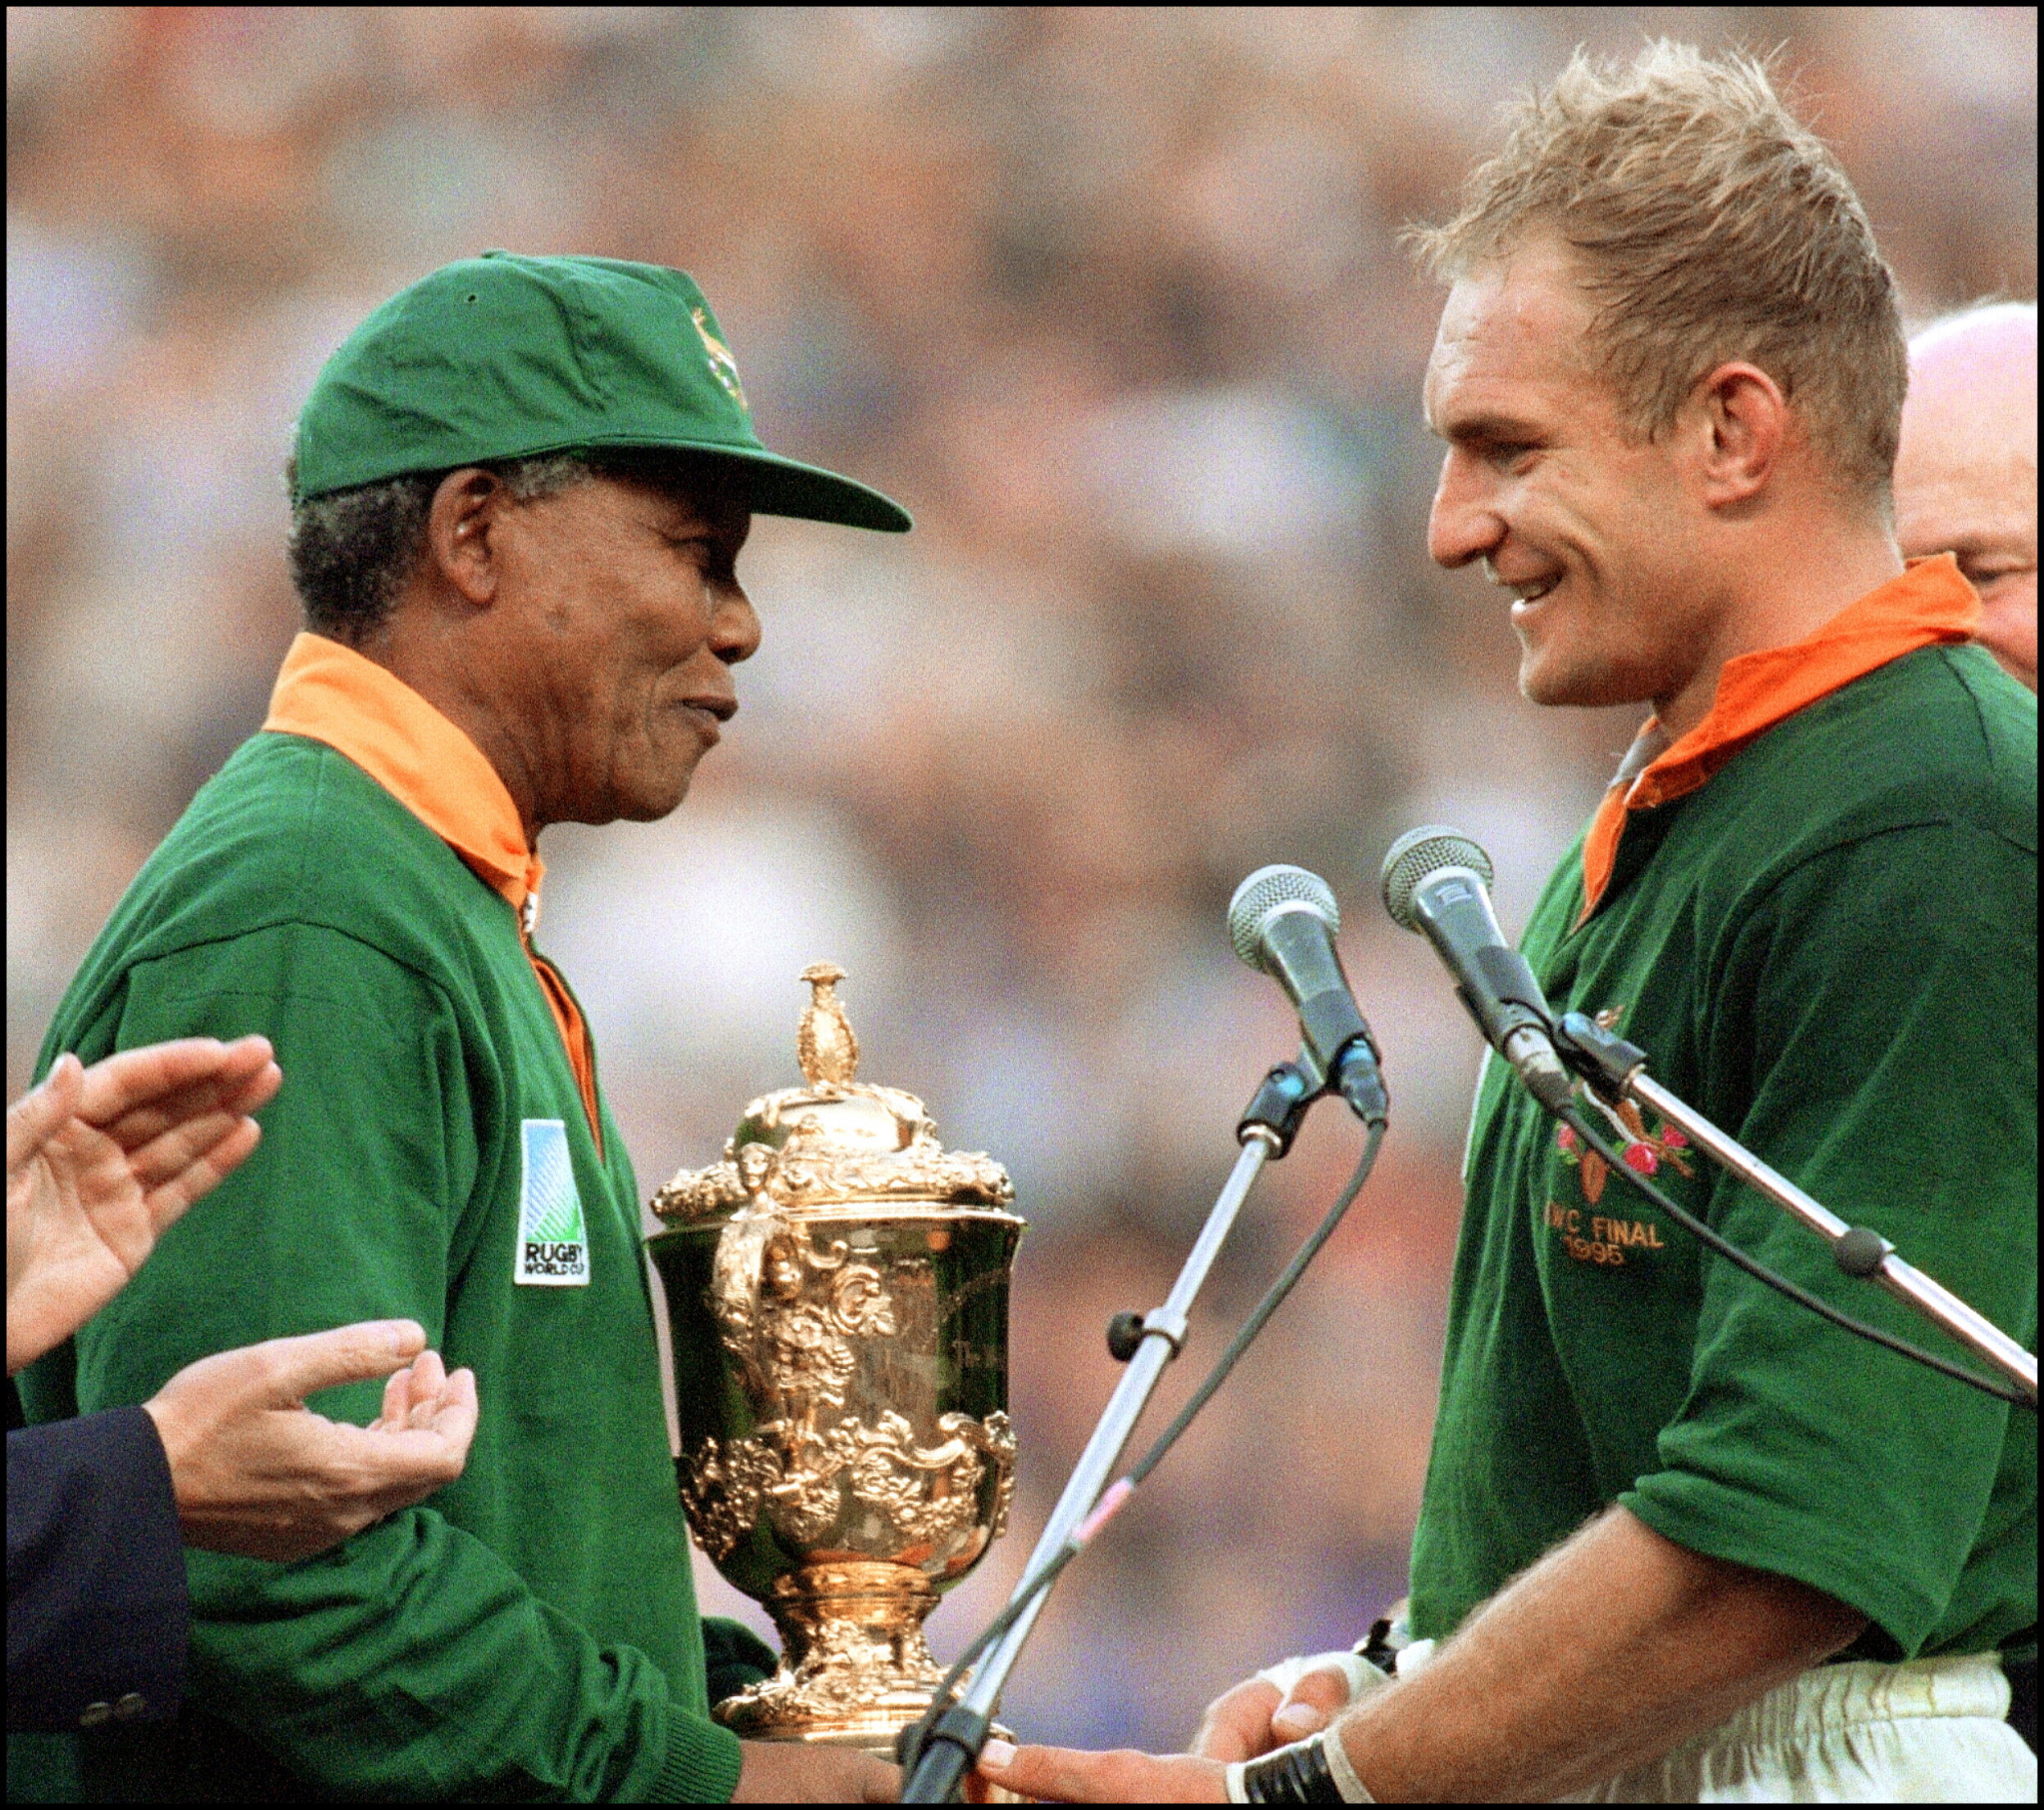 South Africa competed in its first international sporting event after apartheid when the country hosted the 1995 World Cup ©Getty Images